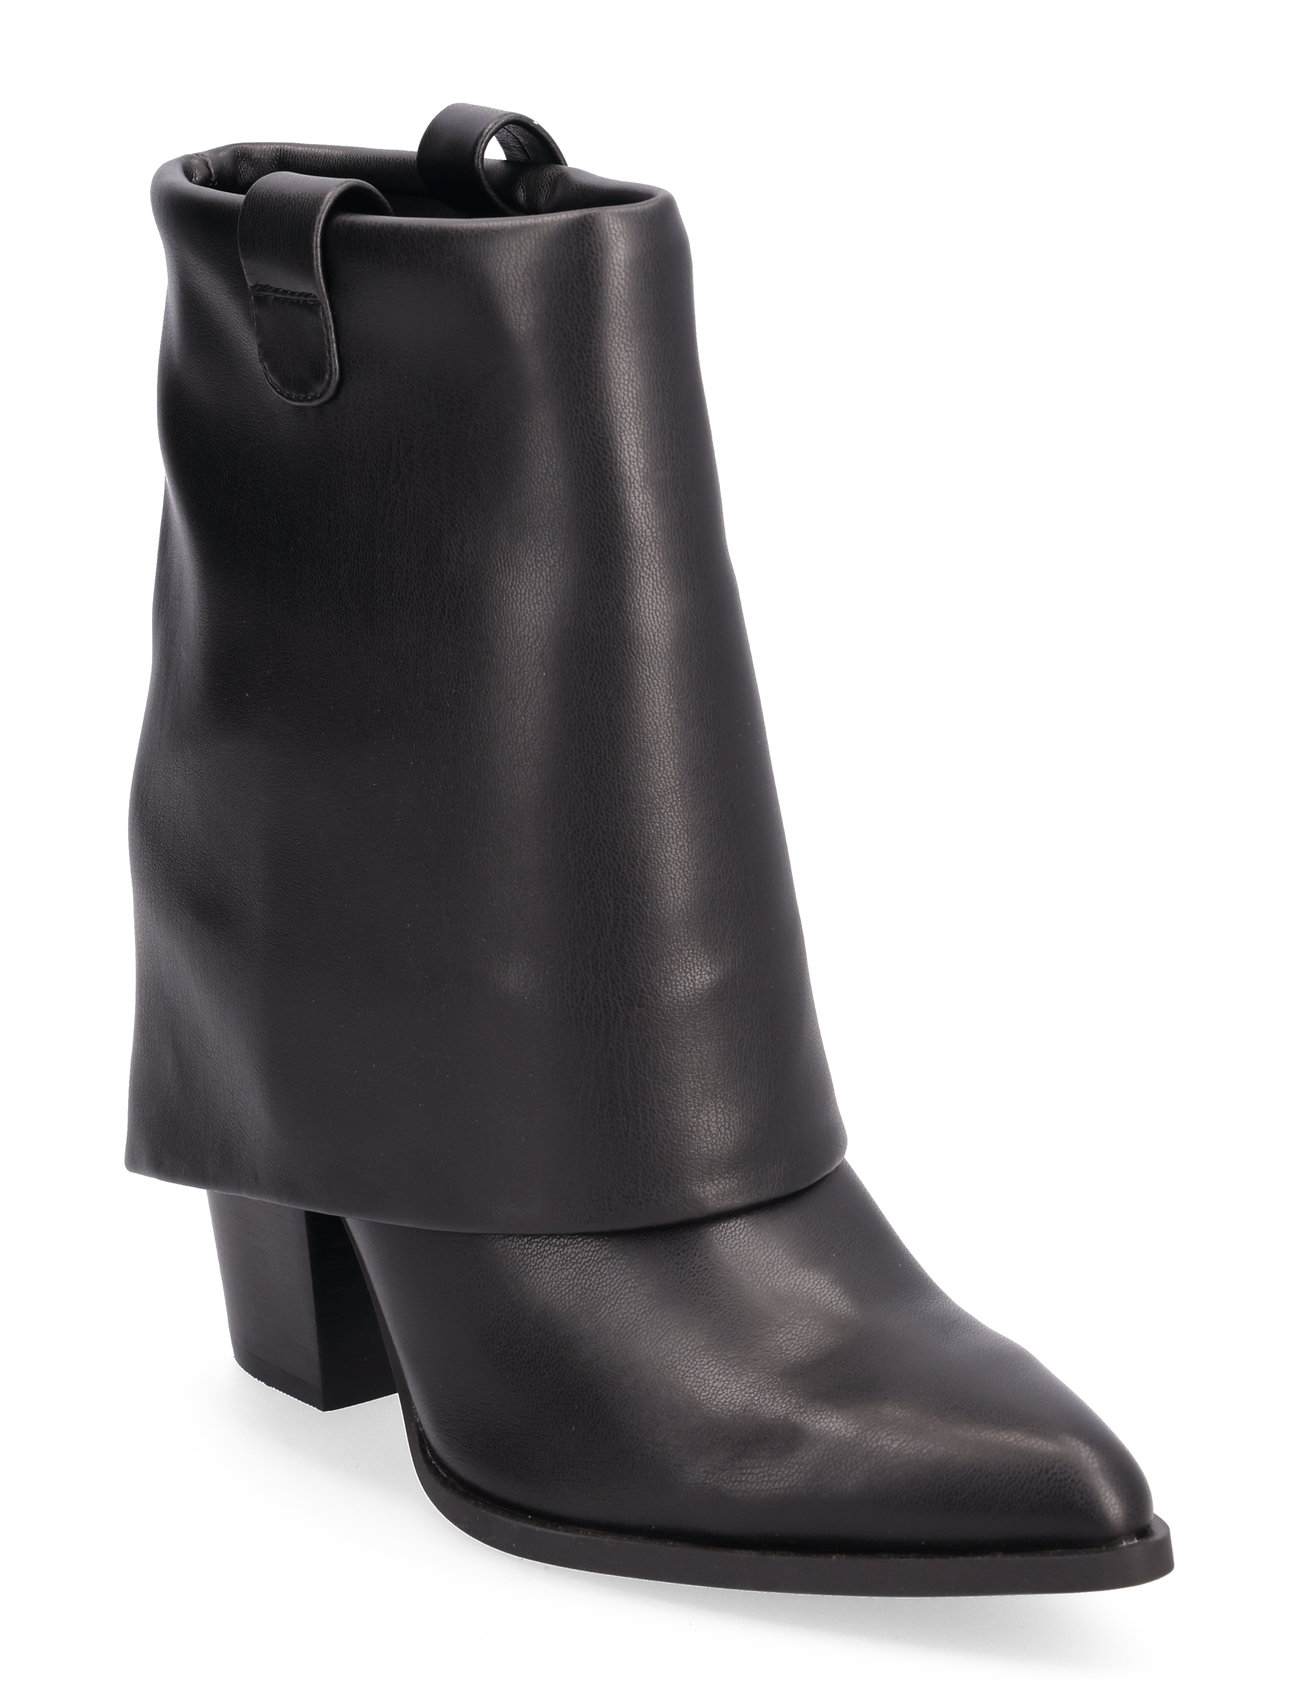 Lark Bootie Shoes Boots Ankle Boots Ankle Boots With Heel Black Steve Madden